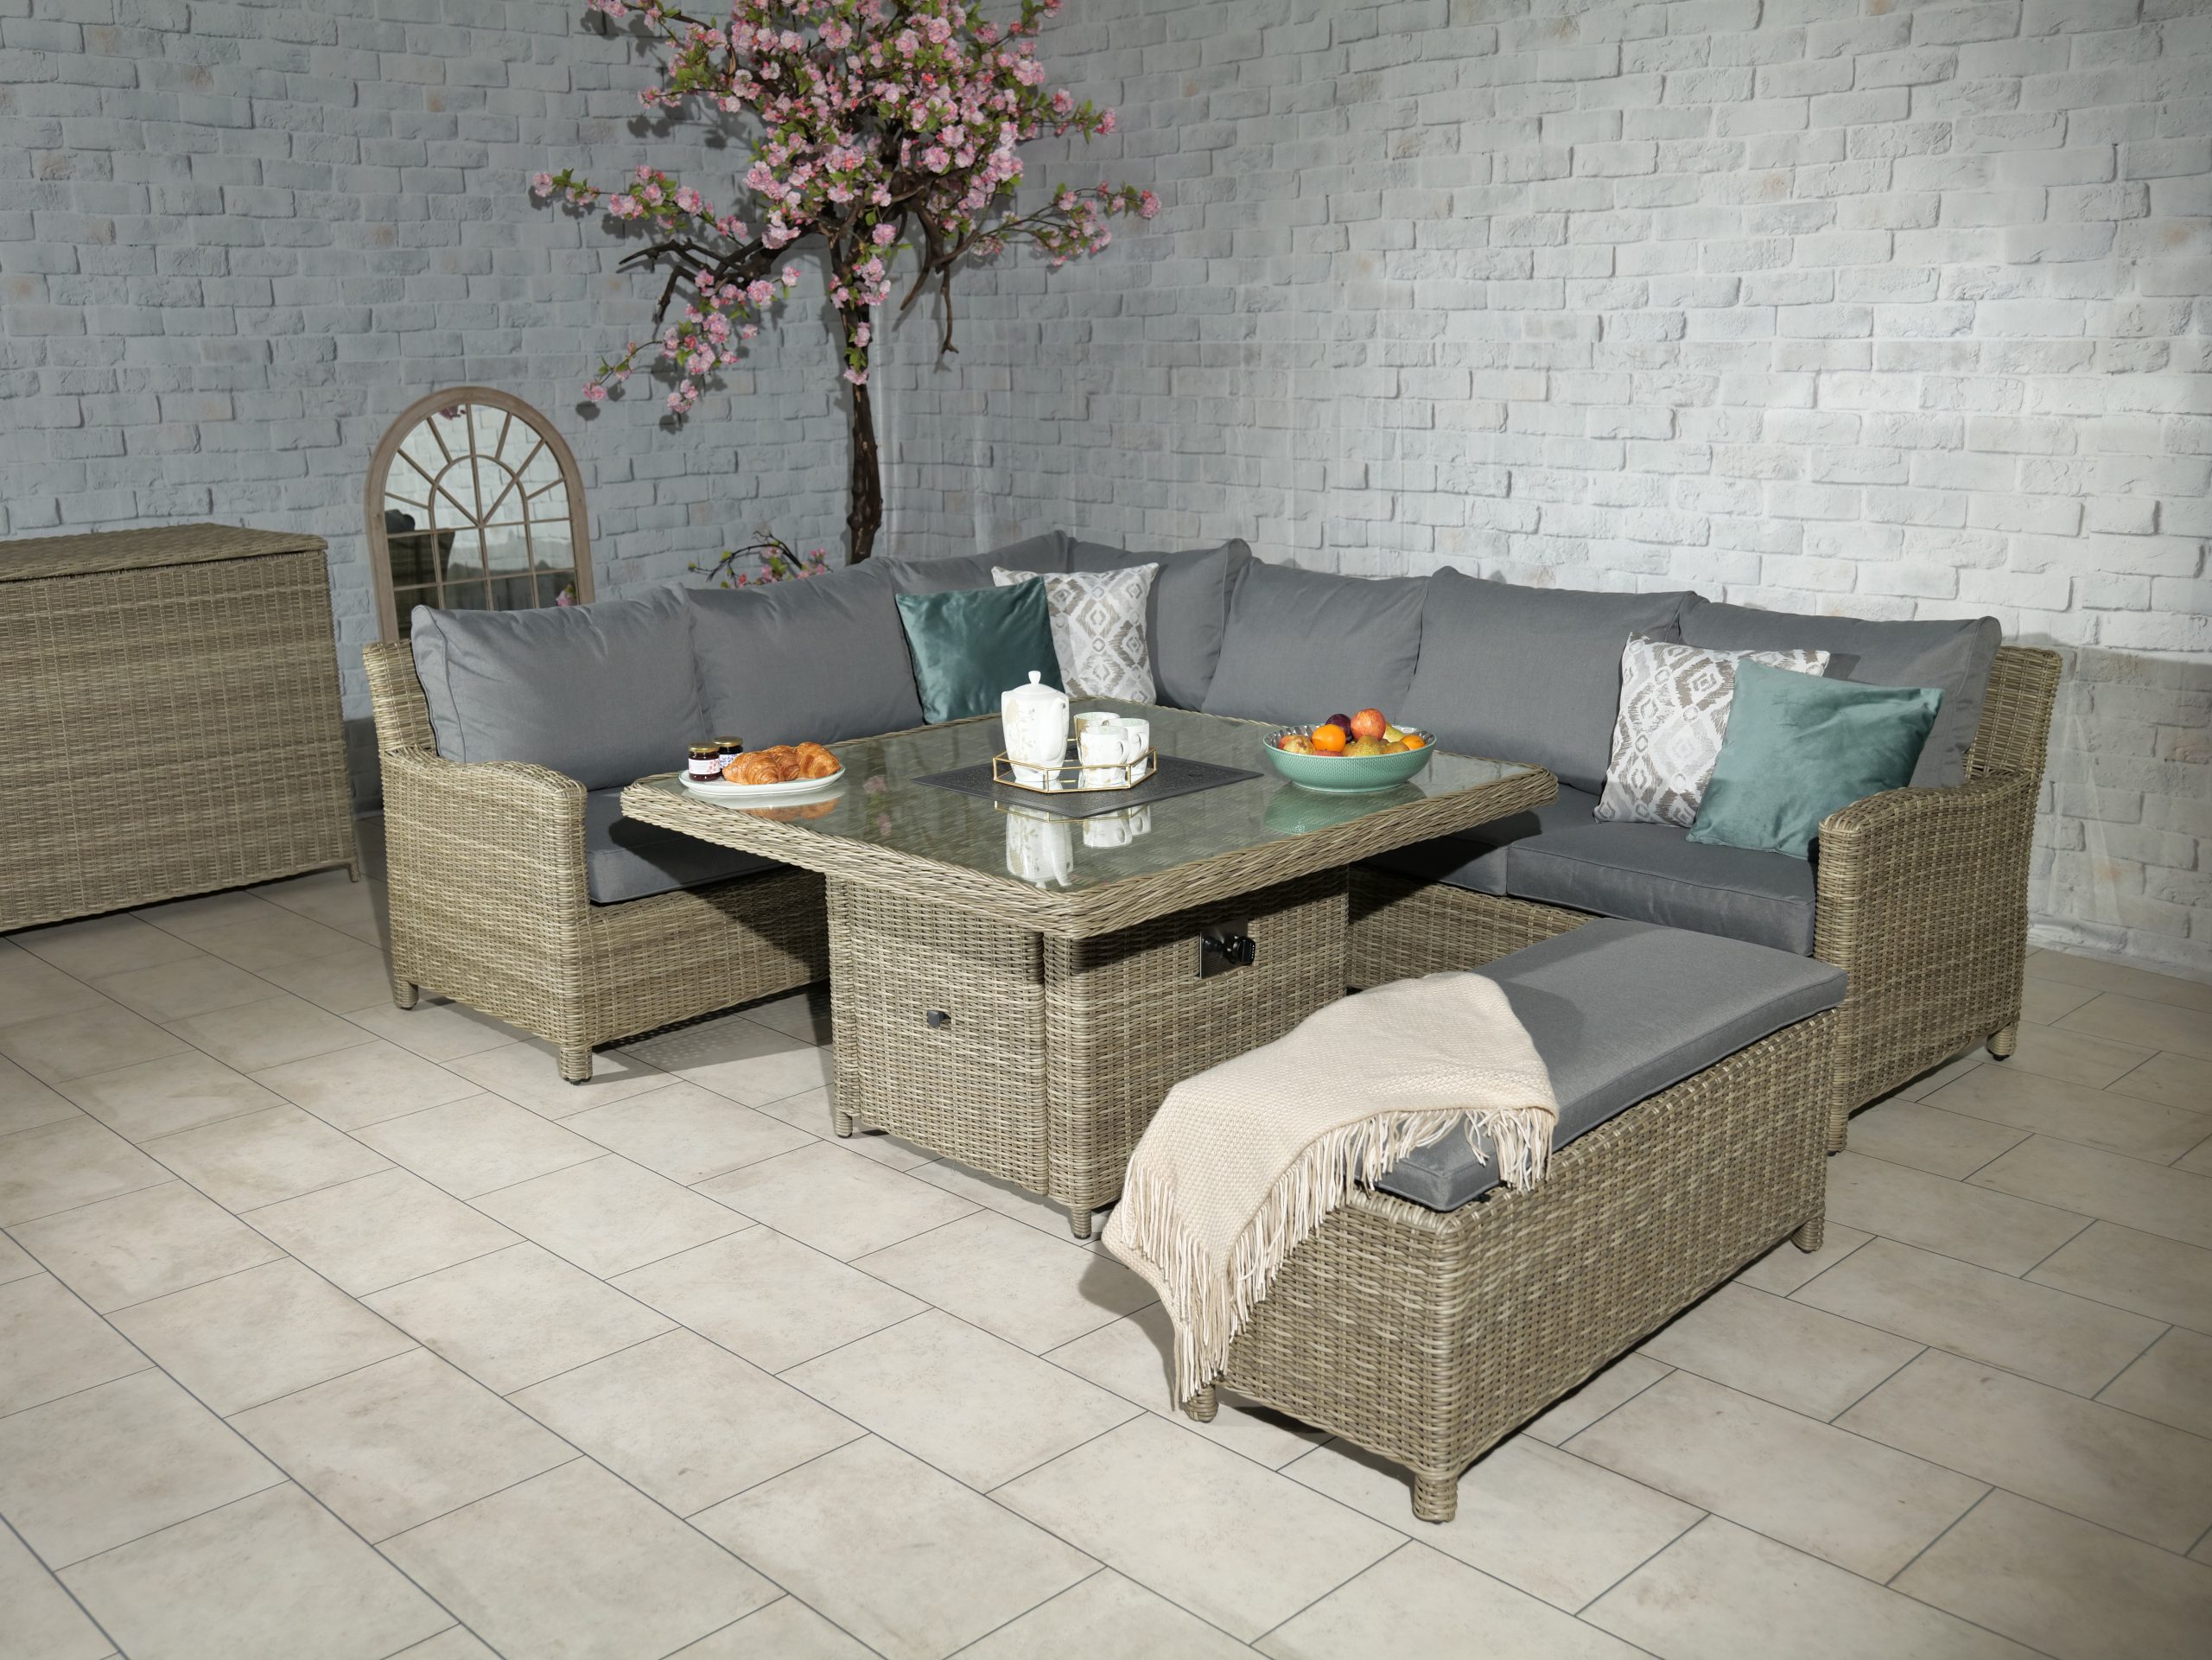 Wentworth Fire Pit Deluxe Corner Lounging Set